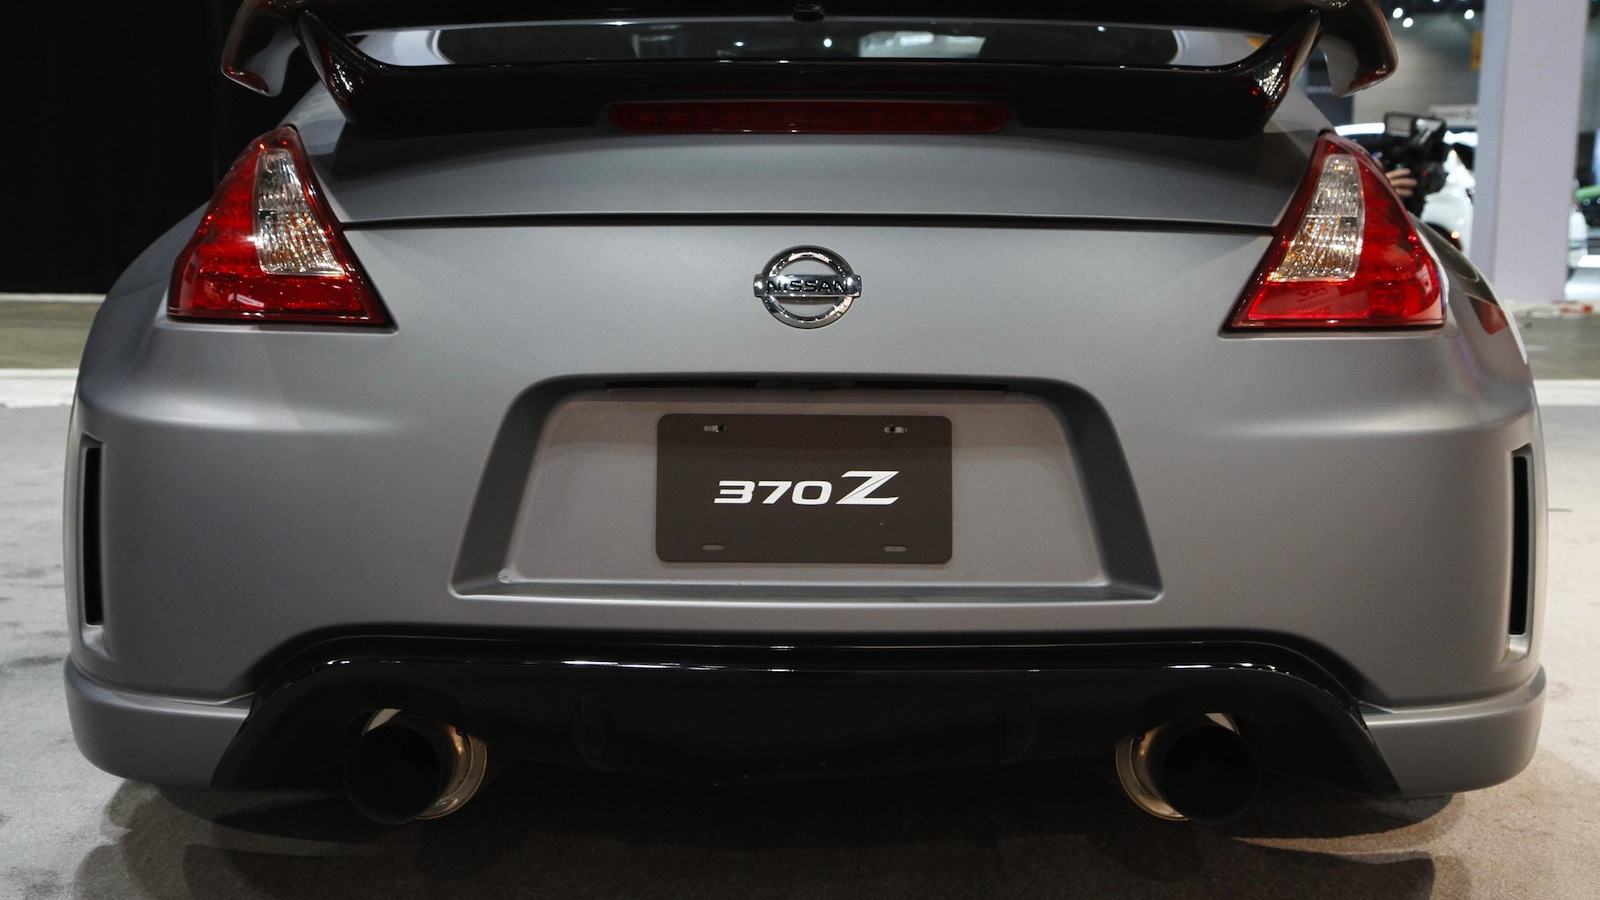 Nissan's Project 370Z - image: Nissan